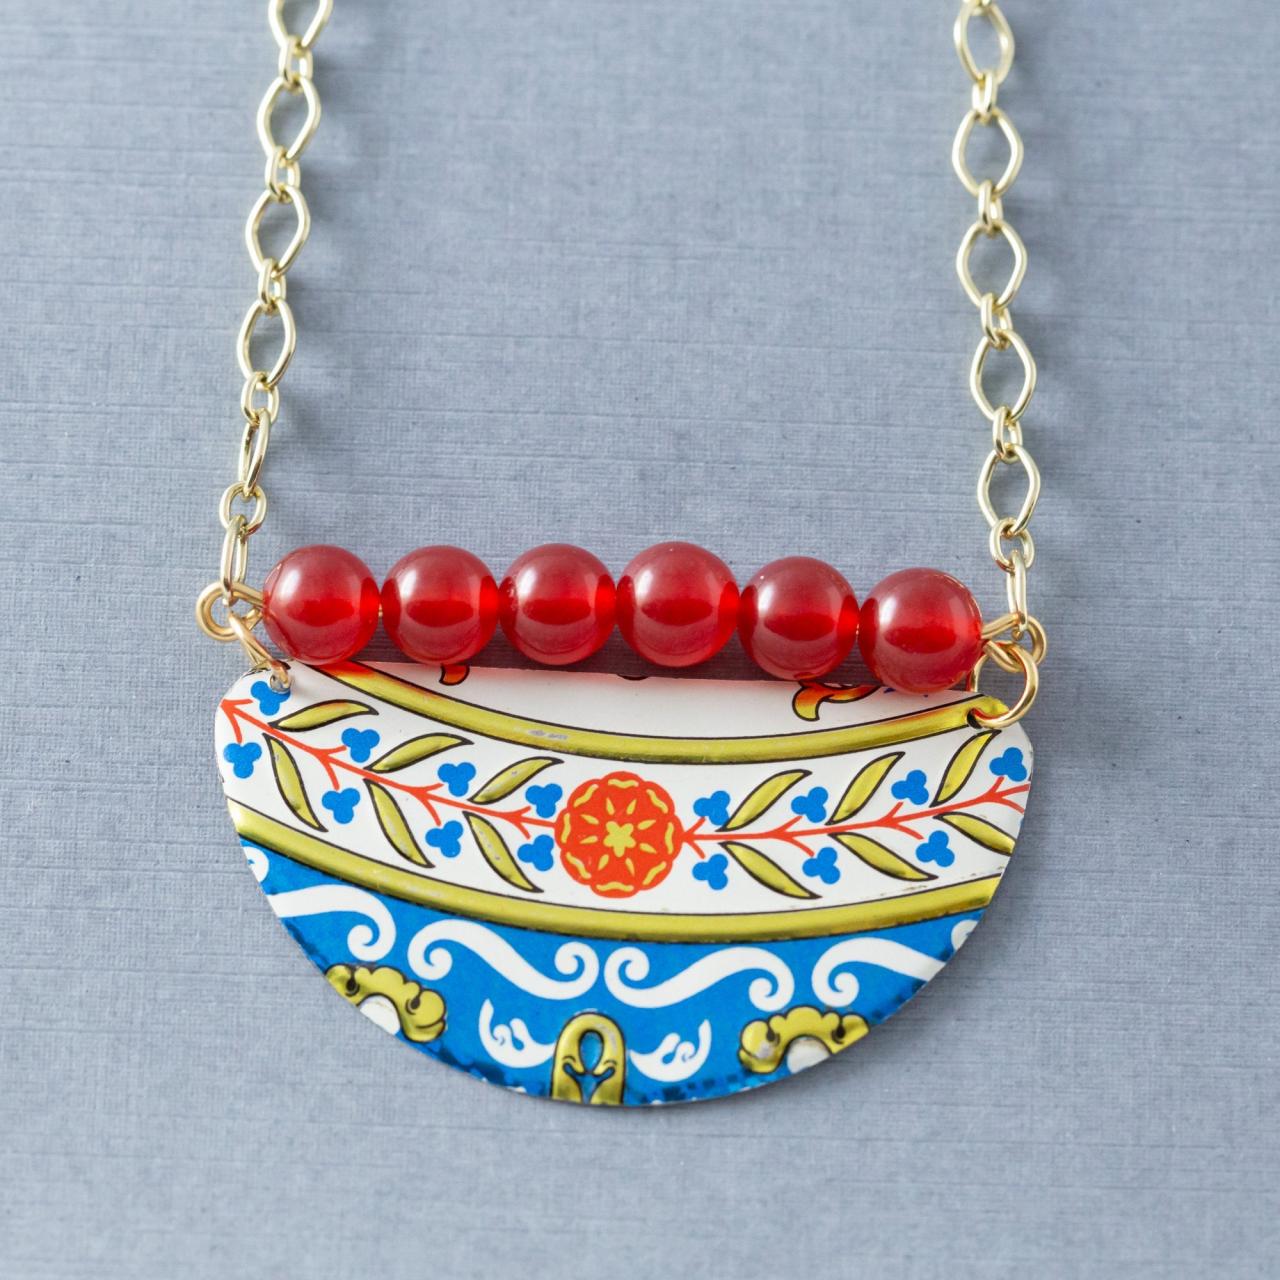 Half Circle Boho Chic Colorful Red And Blue Tin Necklace With Red Quartzite Beads And Gold Tone Chain, Tin Jewelry